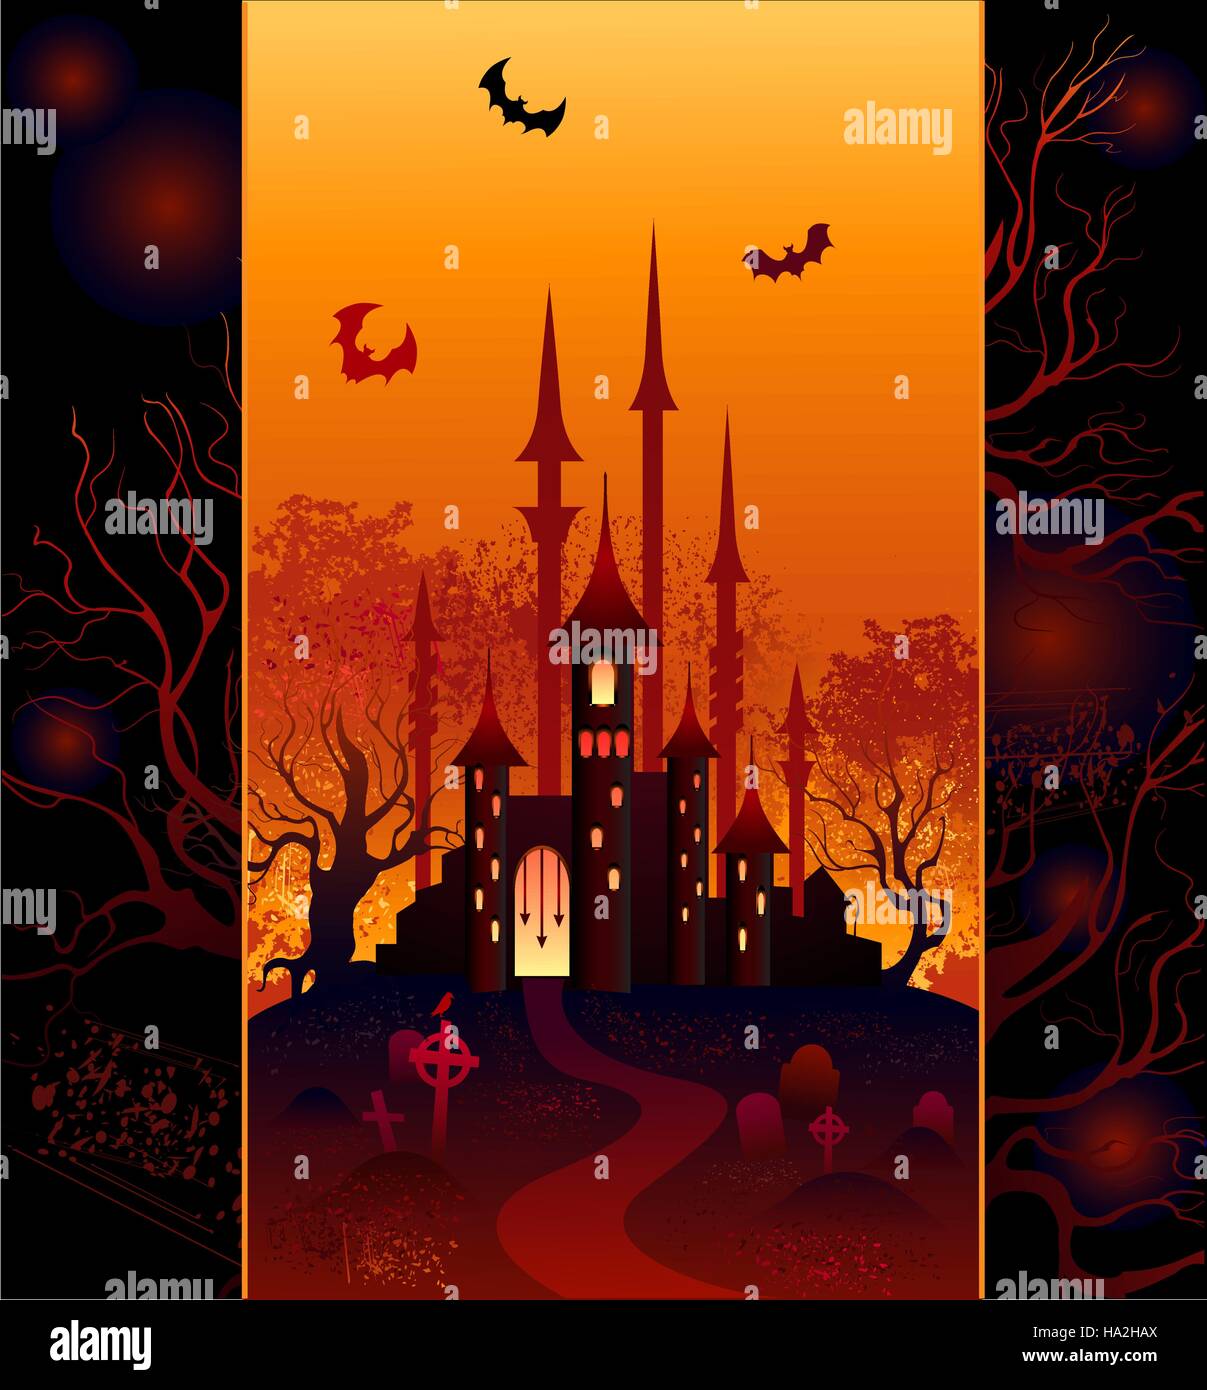 The original design for the mysterious halloween castle, forest and cemetery. Stock Vector